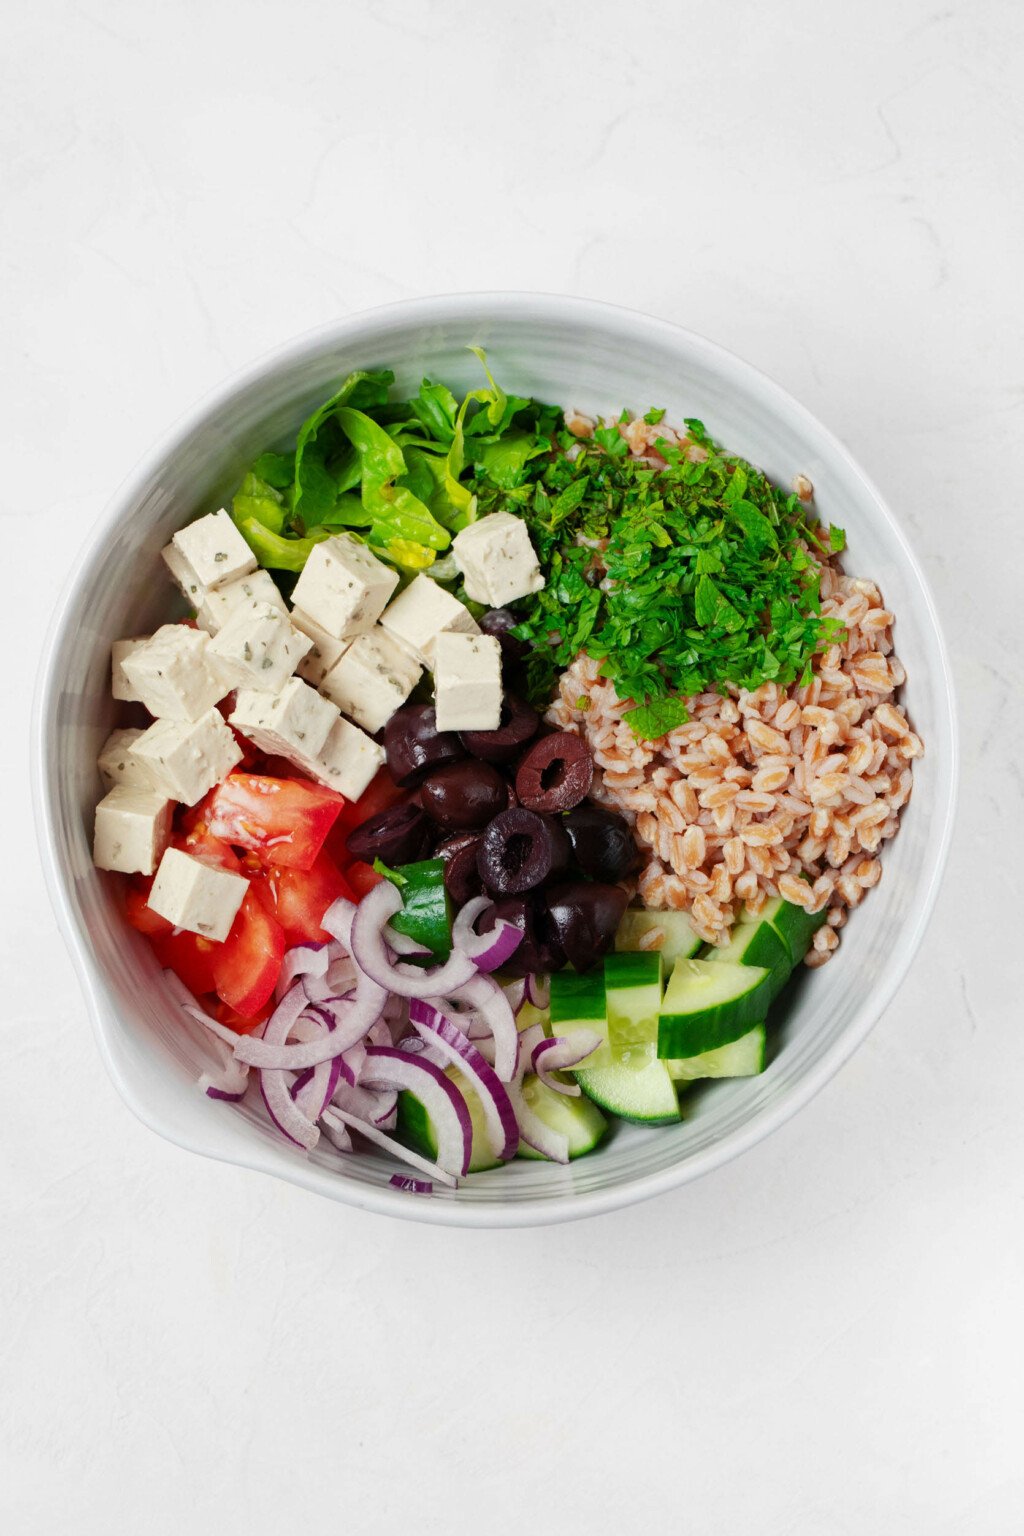 Cubed vegan feta, red onions, cucumber, greens, and barley are resting in a round, white bowl.